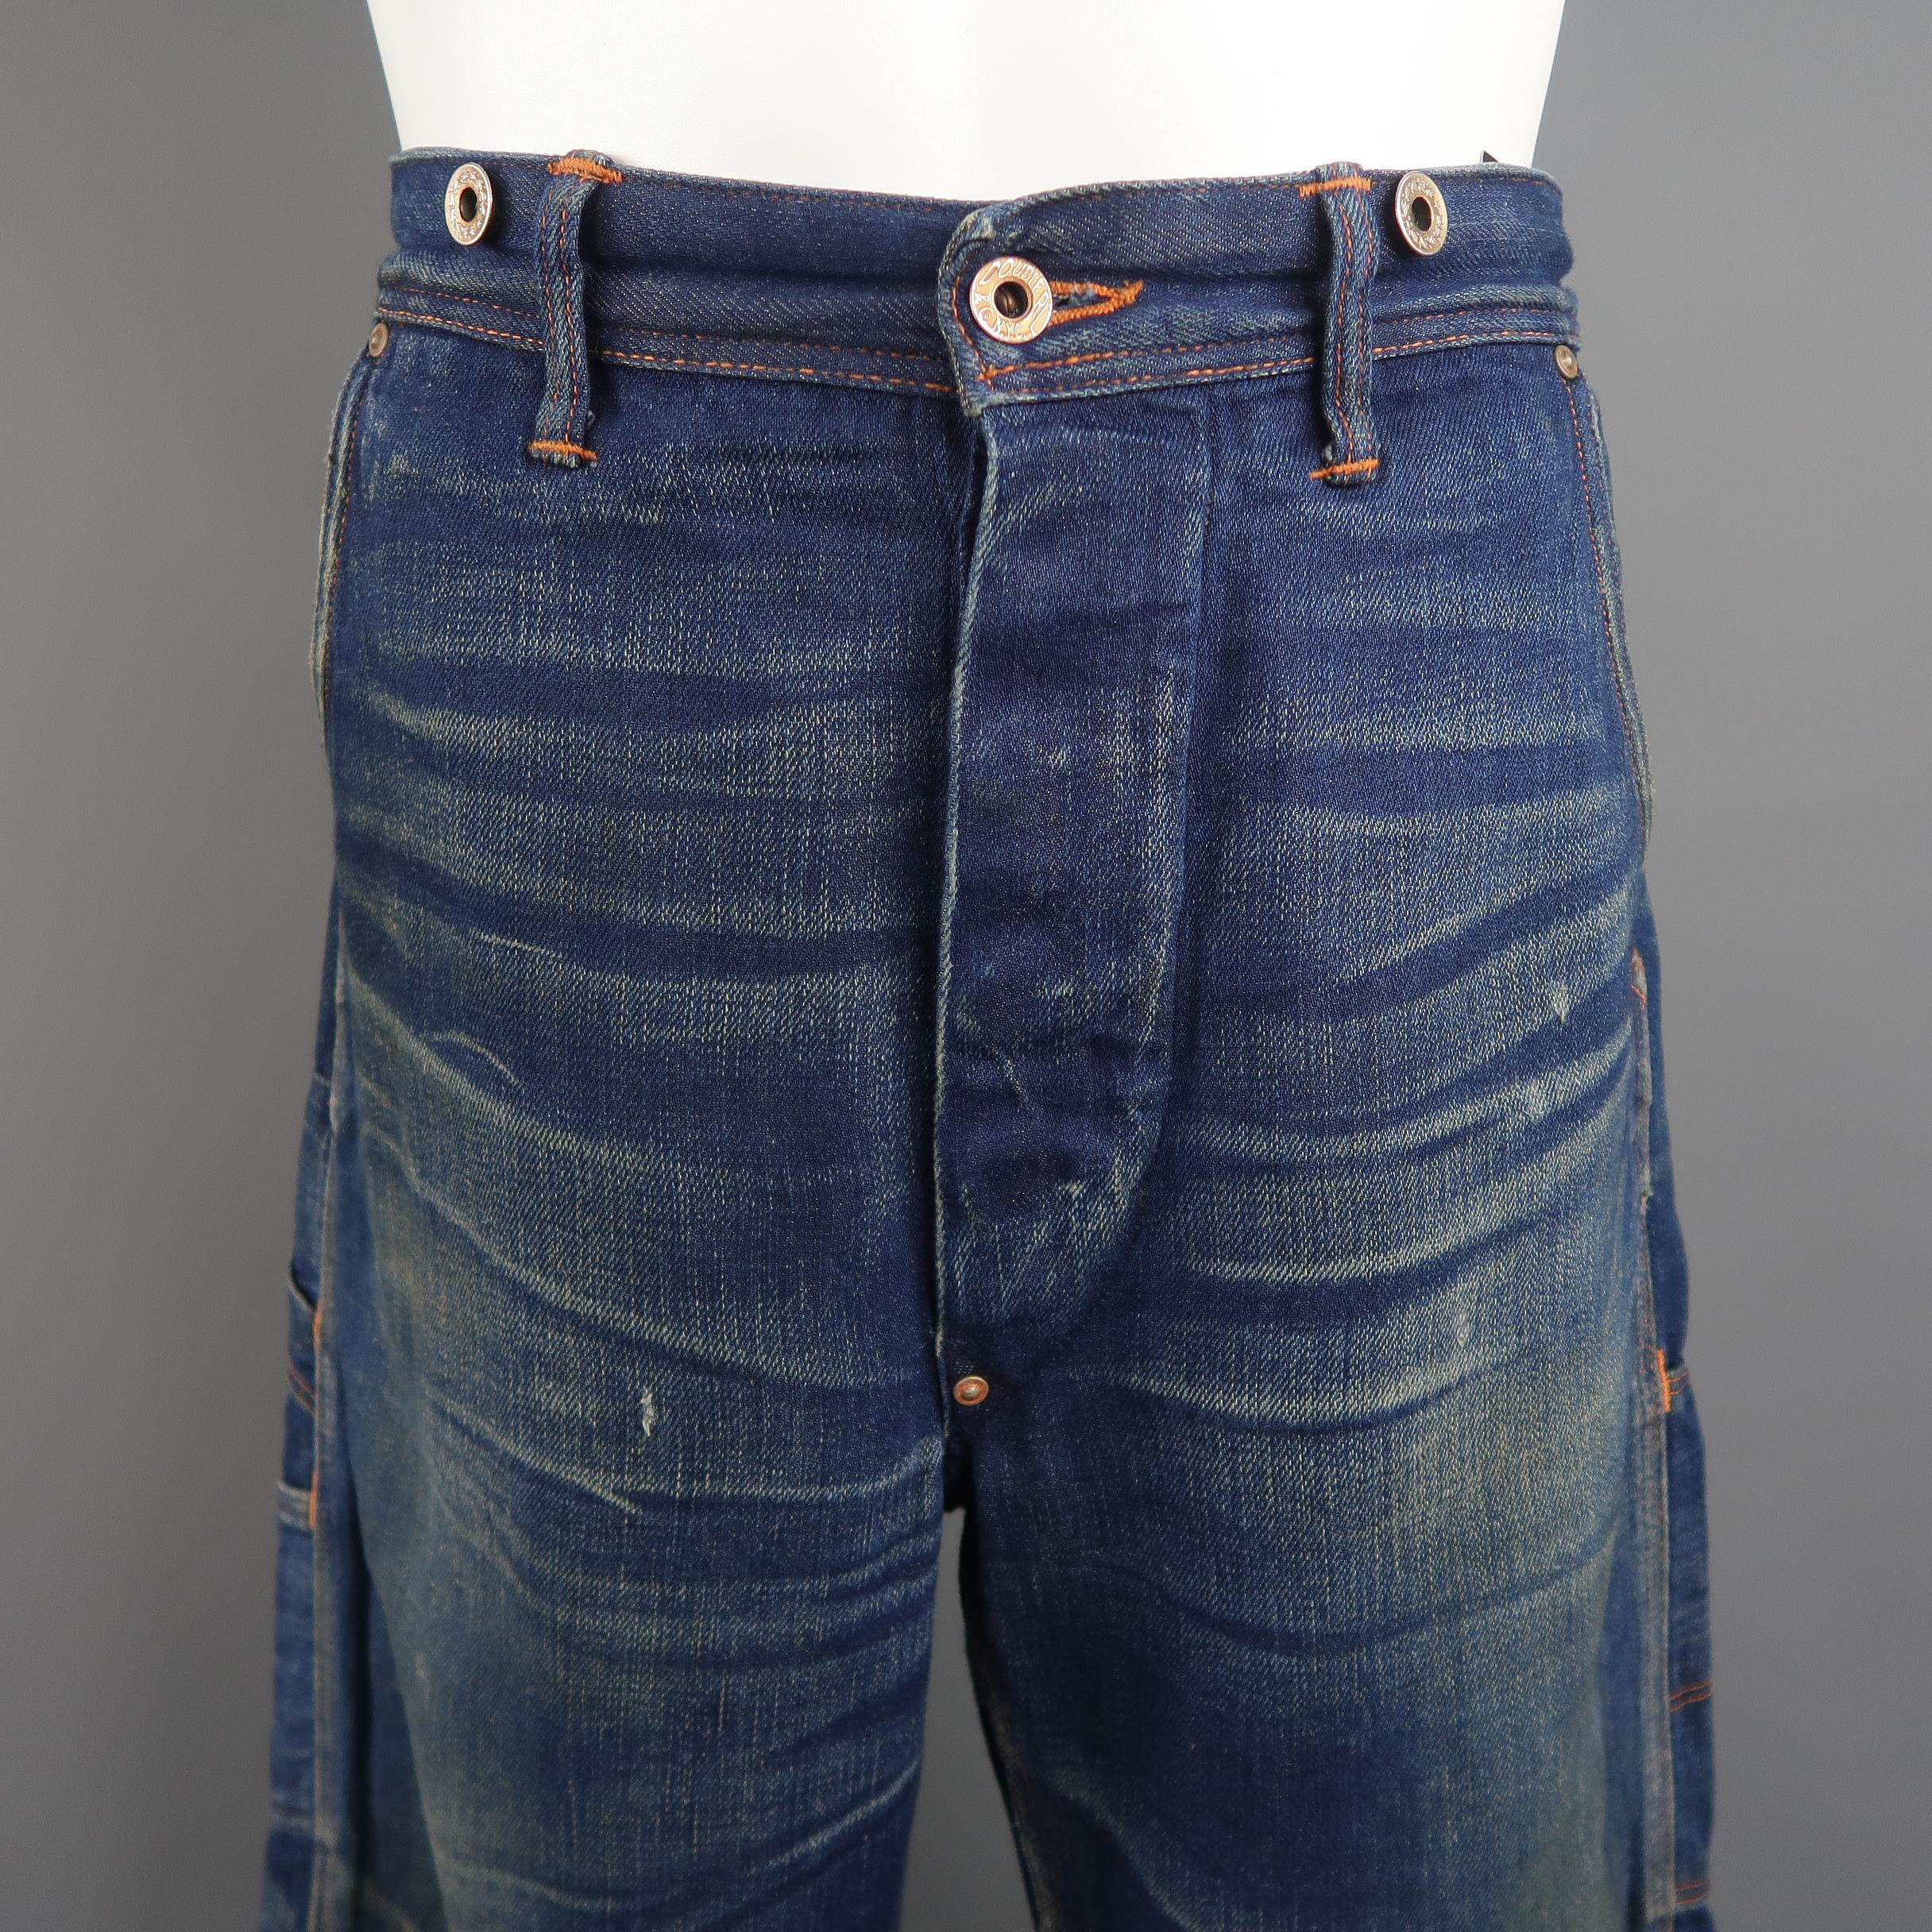 RRL by Ralph Lauren jeans come in medium dark selvedge denim with all over washed and distressed details throughout, brace suspender button  waistband, and back belt. Made in USA.
 
Good Pre-Owned Condition.
Marked: 33X32
 
Measurements:
 
Waist: 36